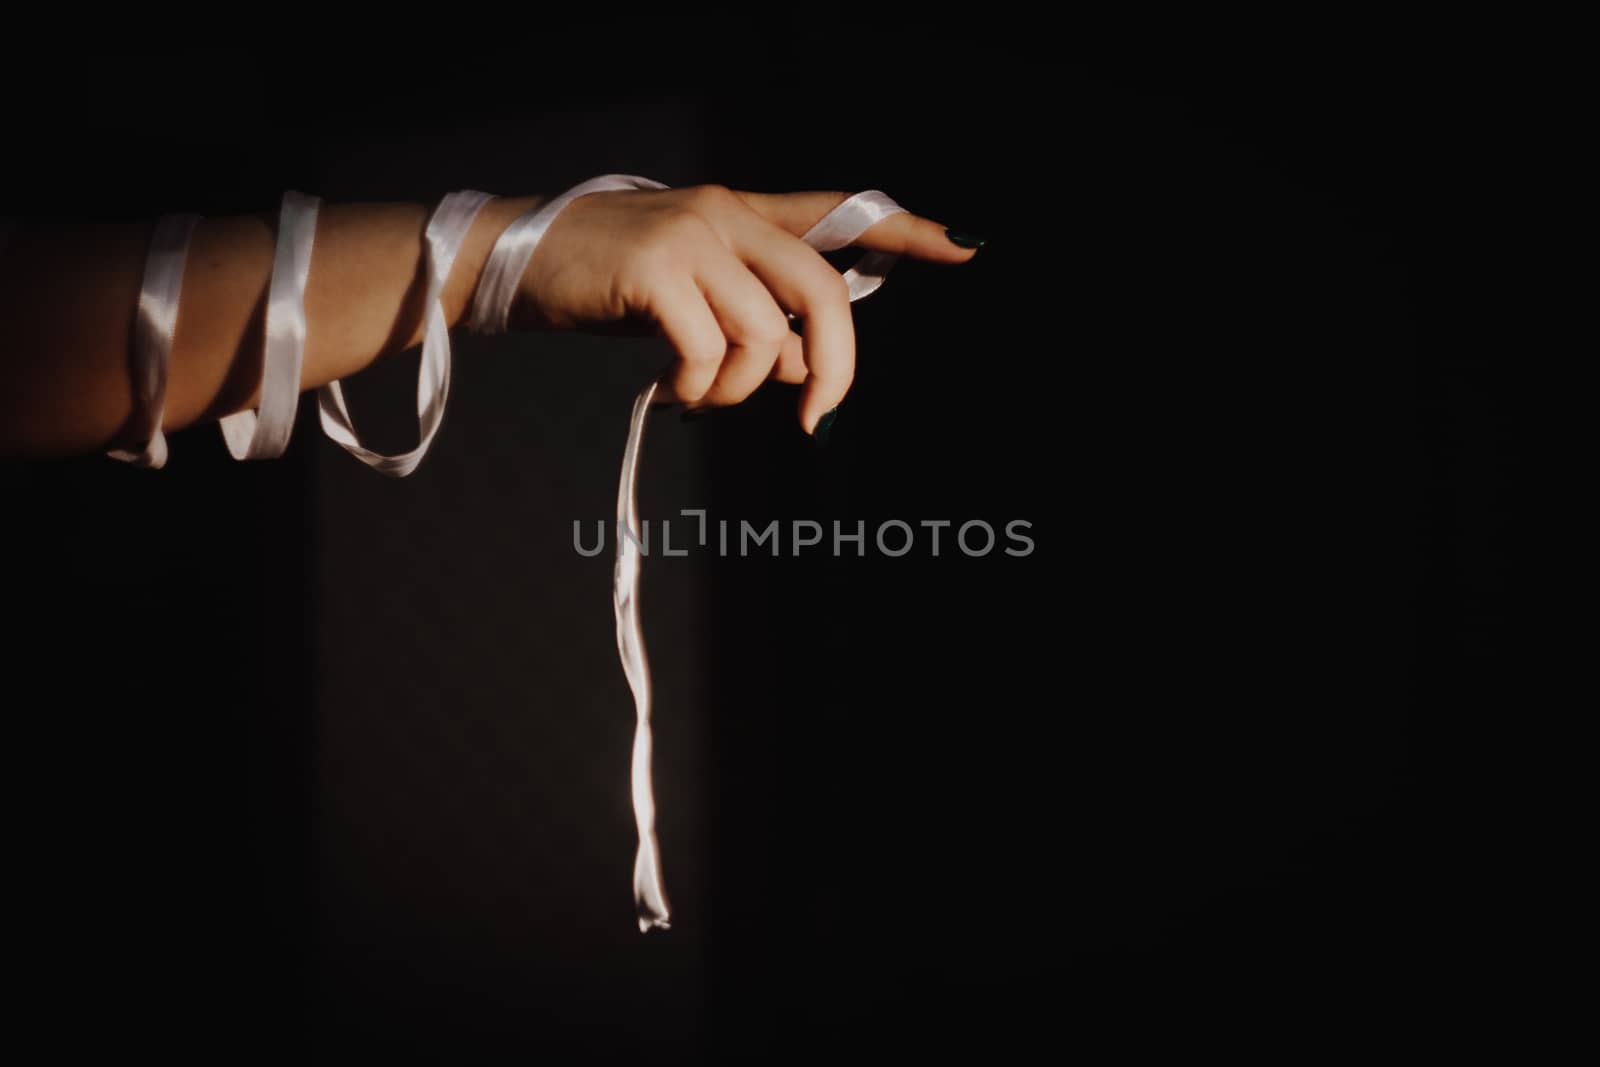 tied hands with ribbon isolated on black background highlighted with light